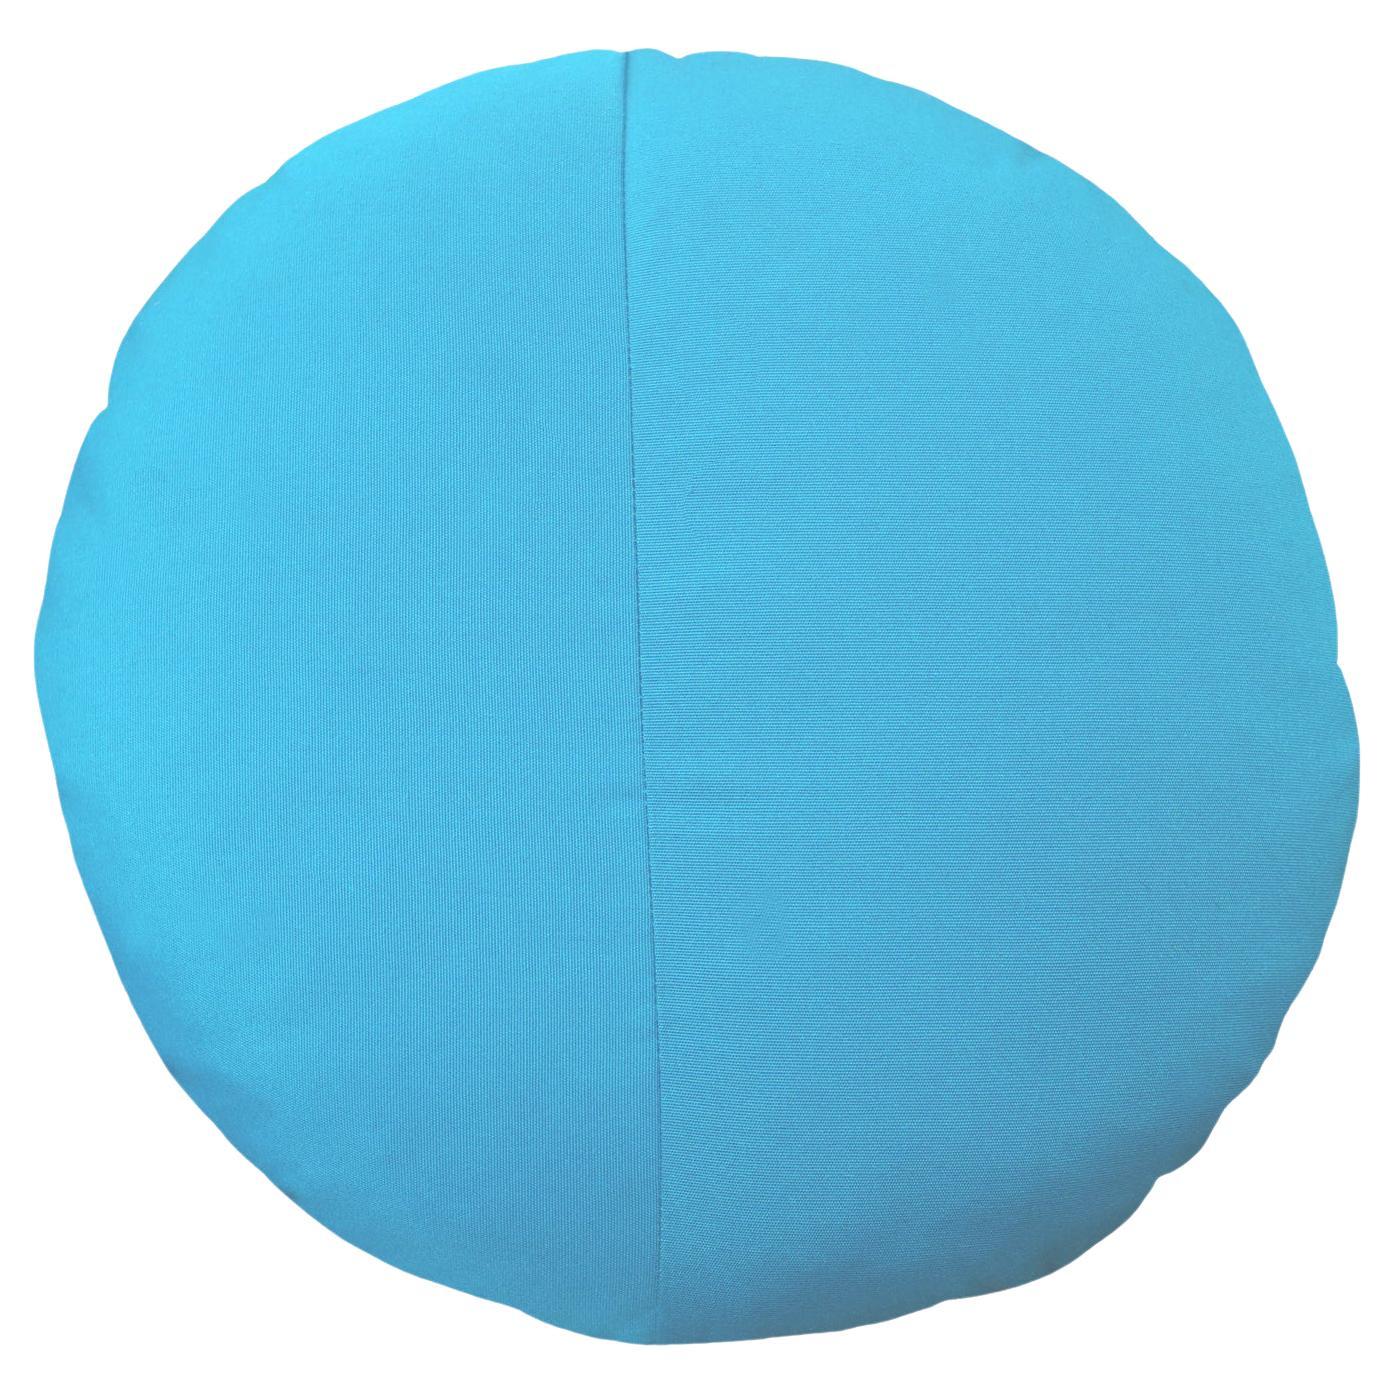 COLORFUL HOME ACCENT THROW PILLOWS

Our Round Throw Pillows are filled with down and available in a variety of Sunbrella Fabric colors for your home styling needs. With more than 10 colors to choose from, we're sure you'll find the color you're